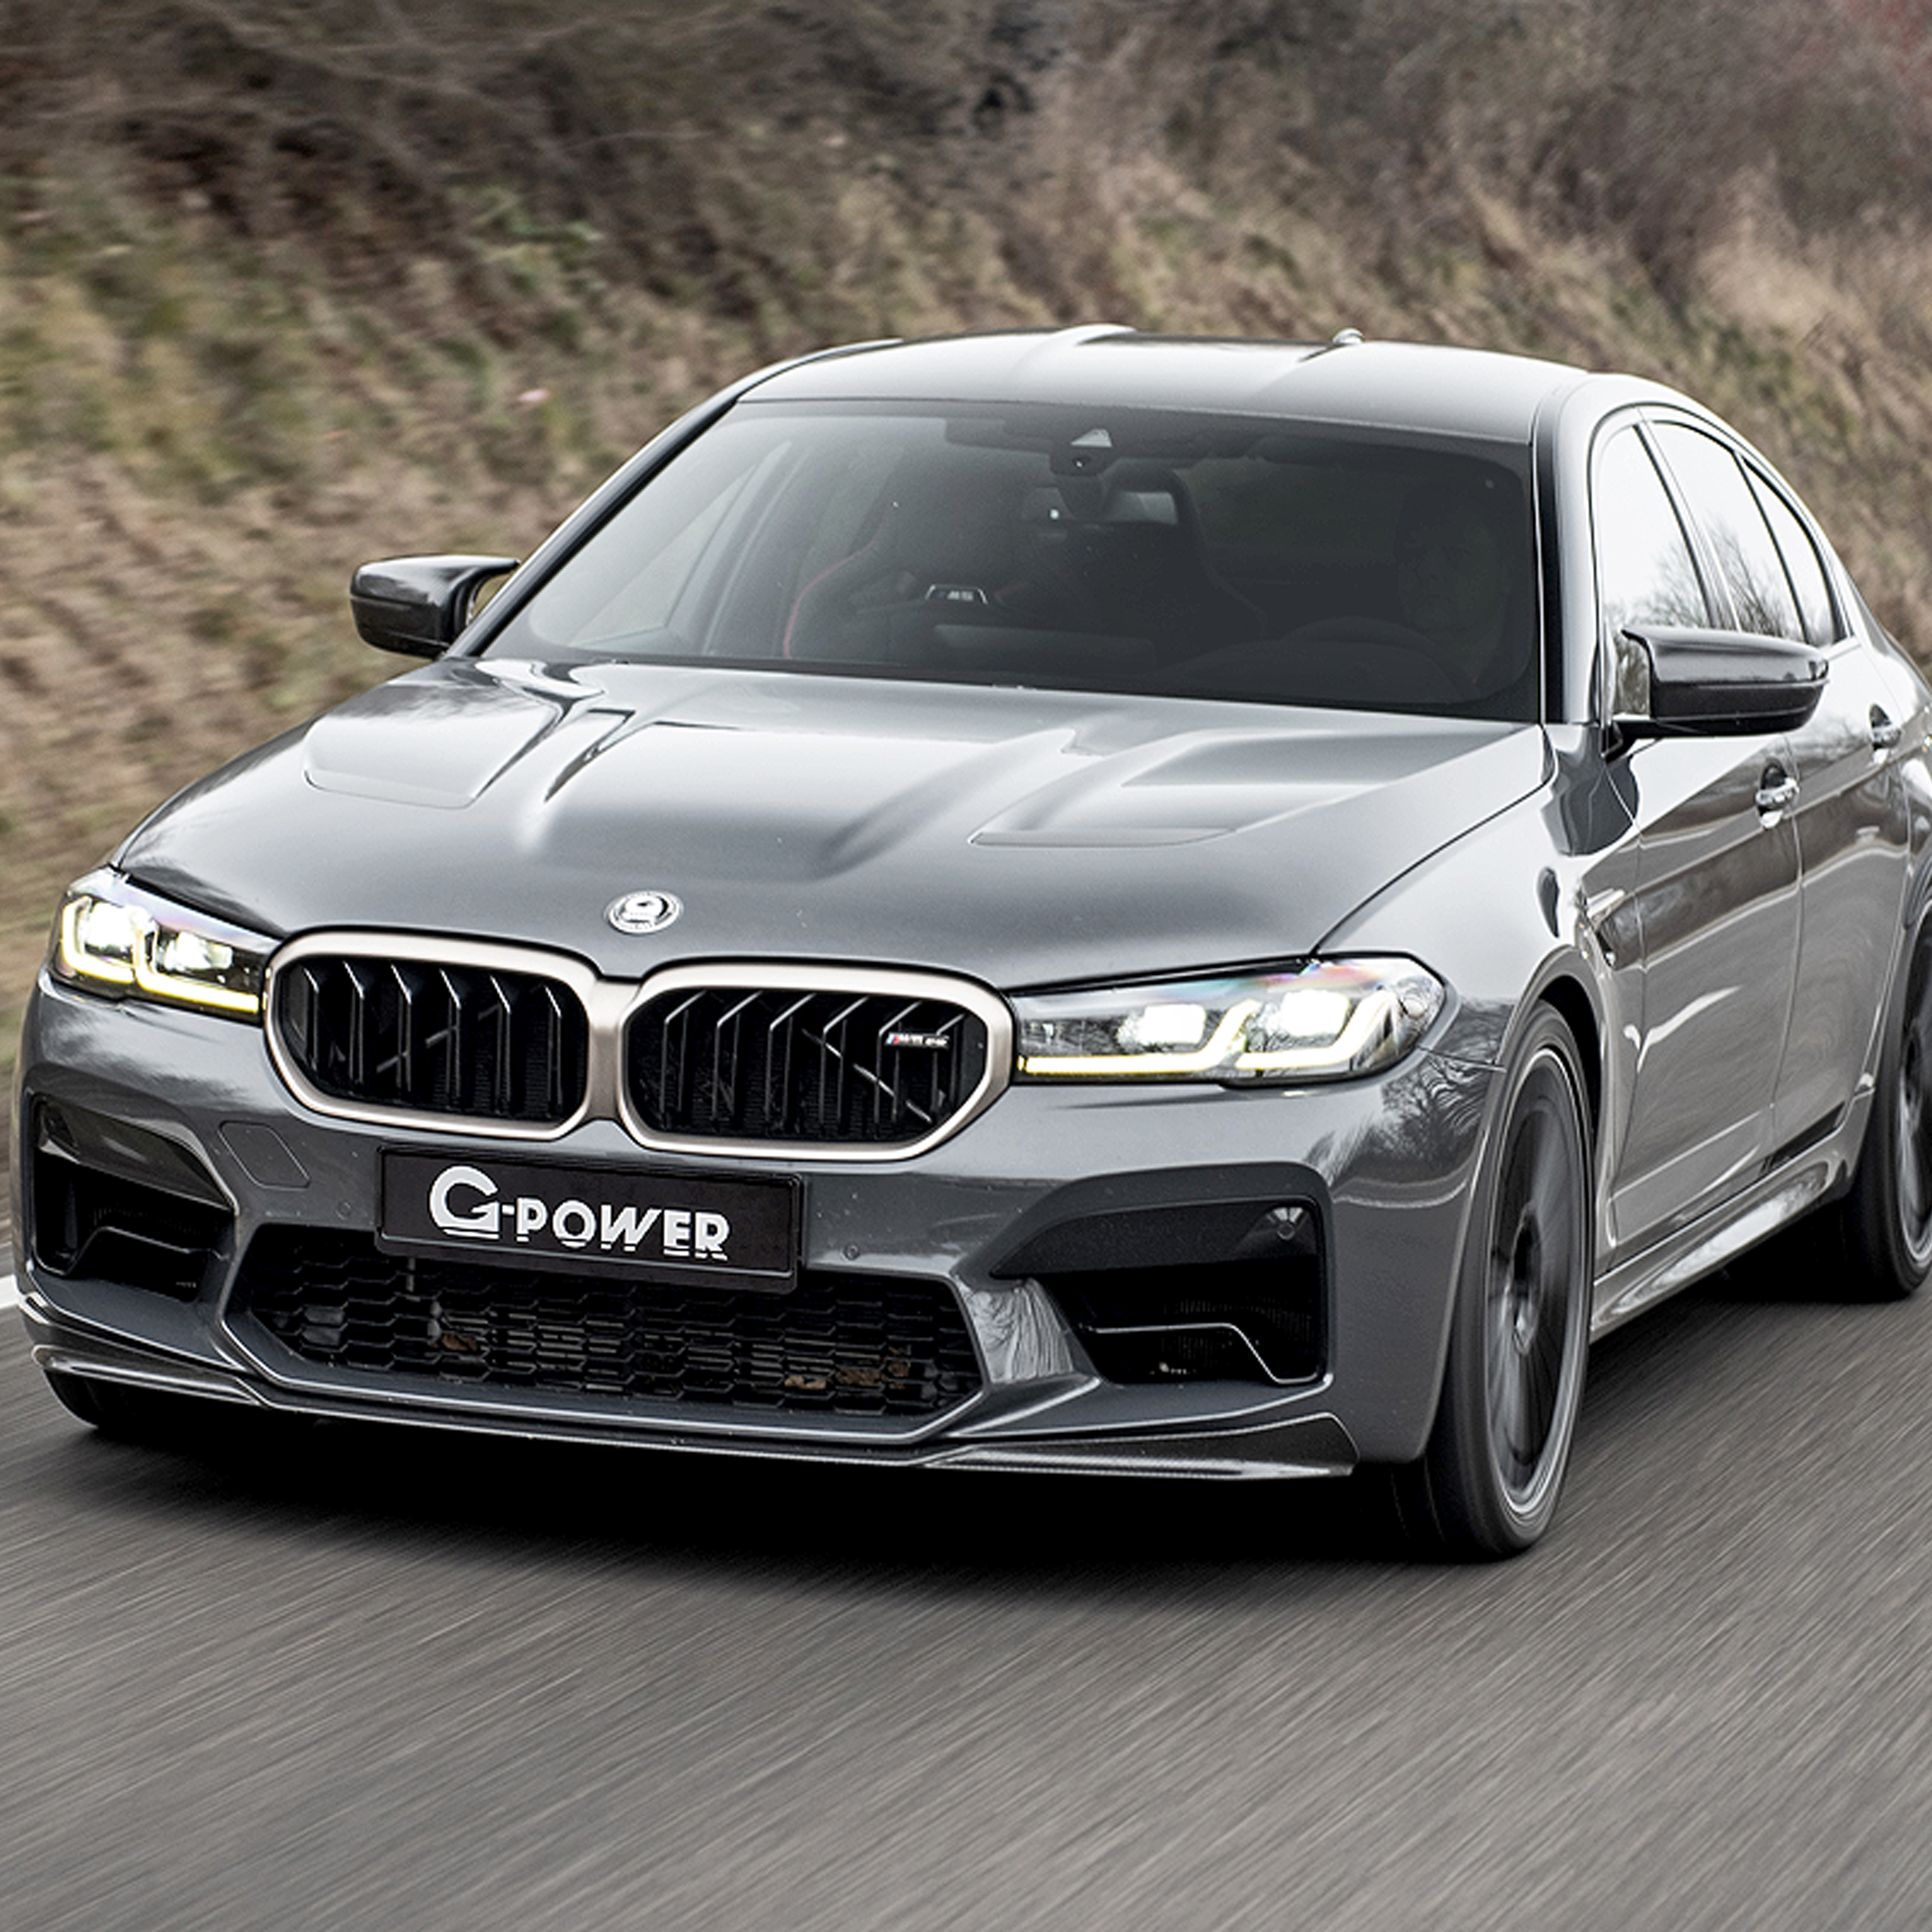 2023 BMW G Power Release Date